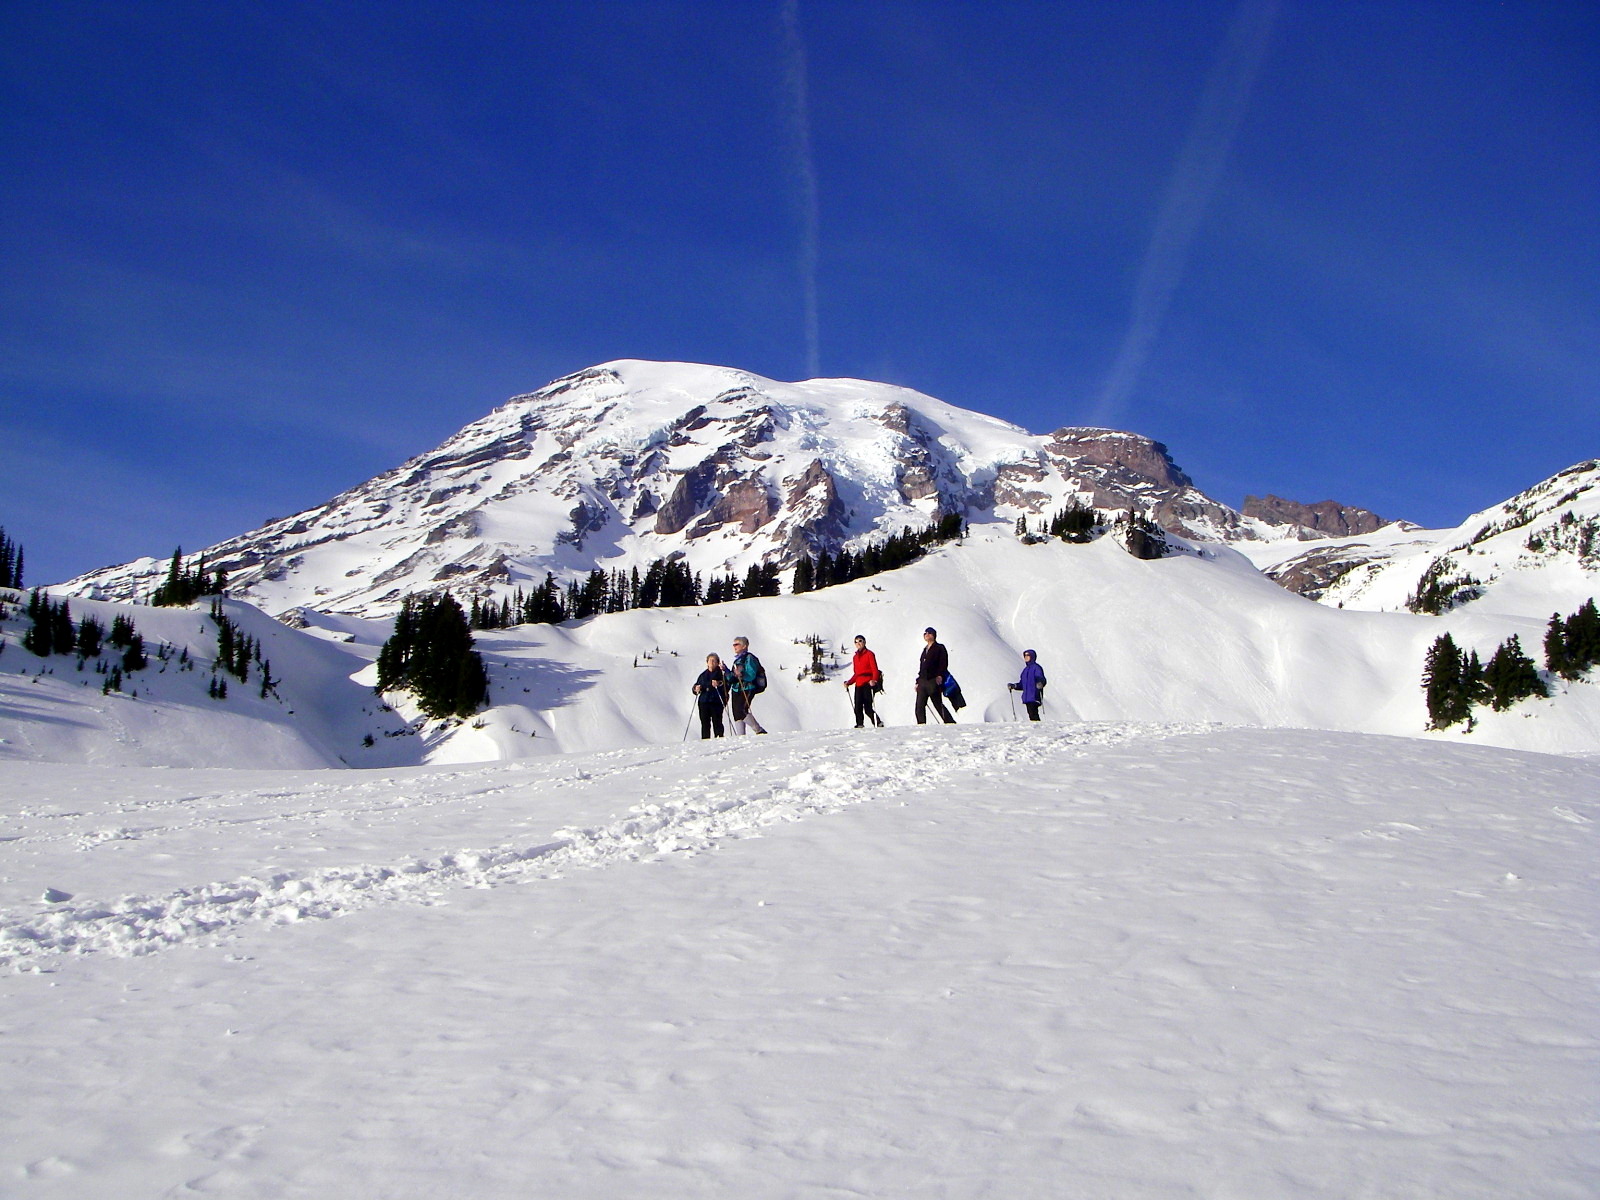 Mount Rainier at paradise, hiking in the winter, nearby to Kent, Washington